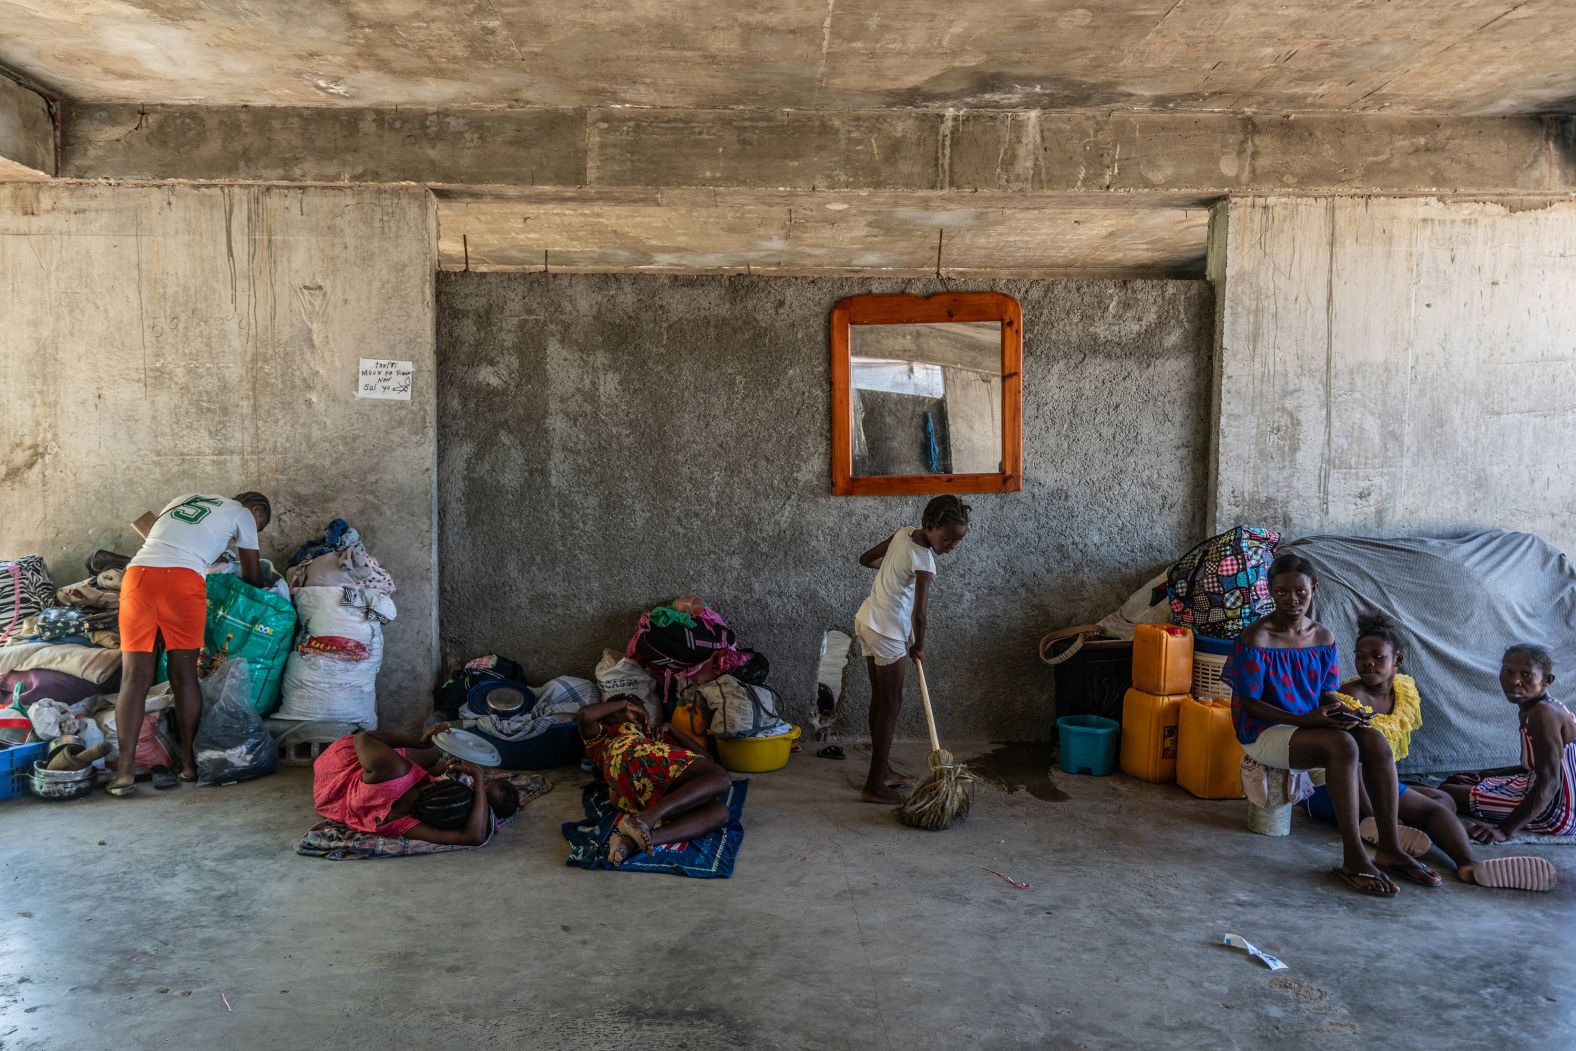 A family, driven from their home just hours earlier, set up shelter at an abandoned school in Port-au-Prince.